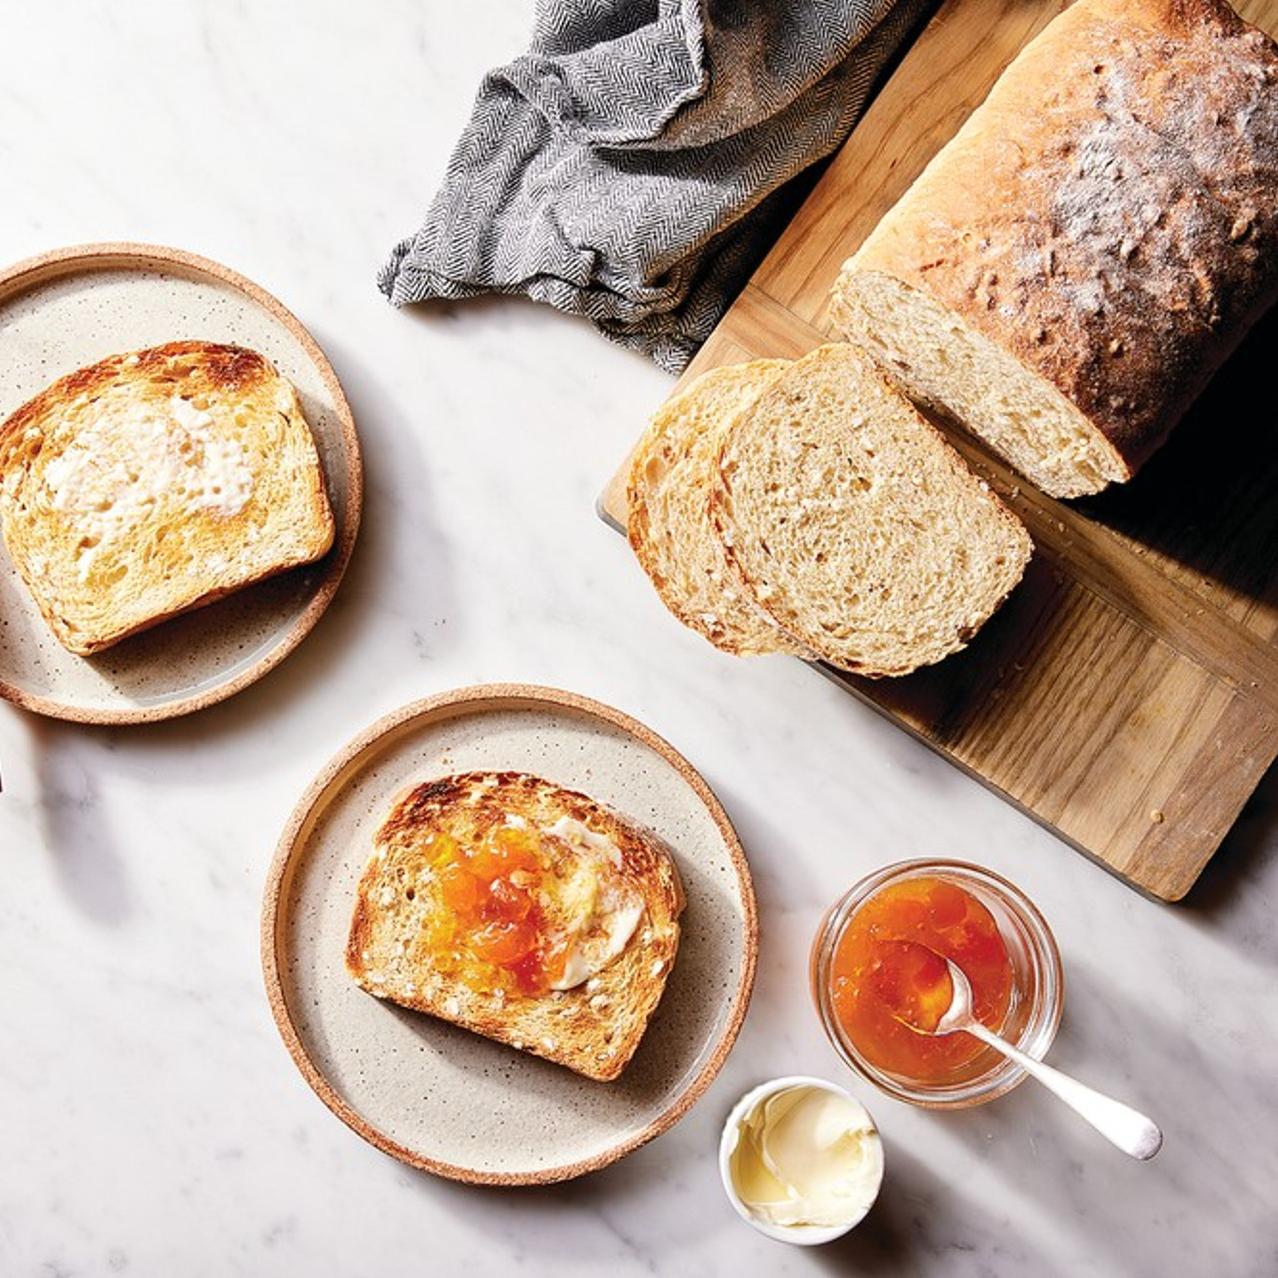  A delicious alternative to plain old toast